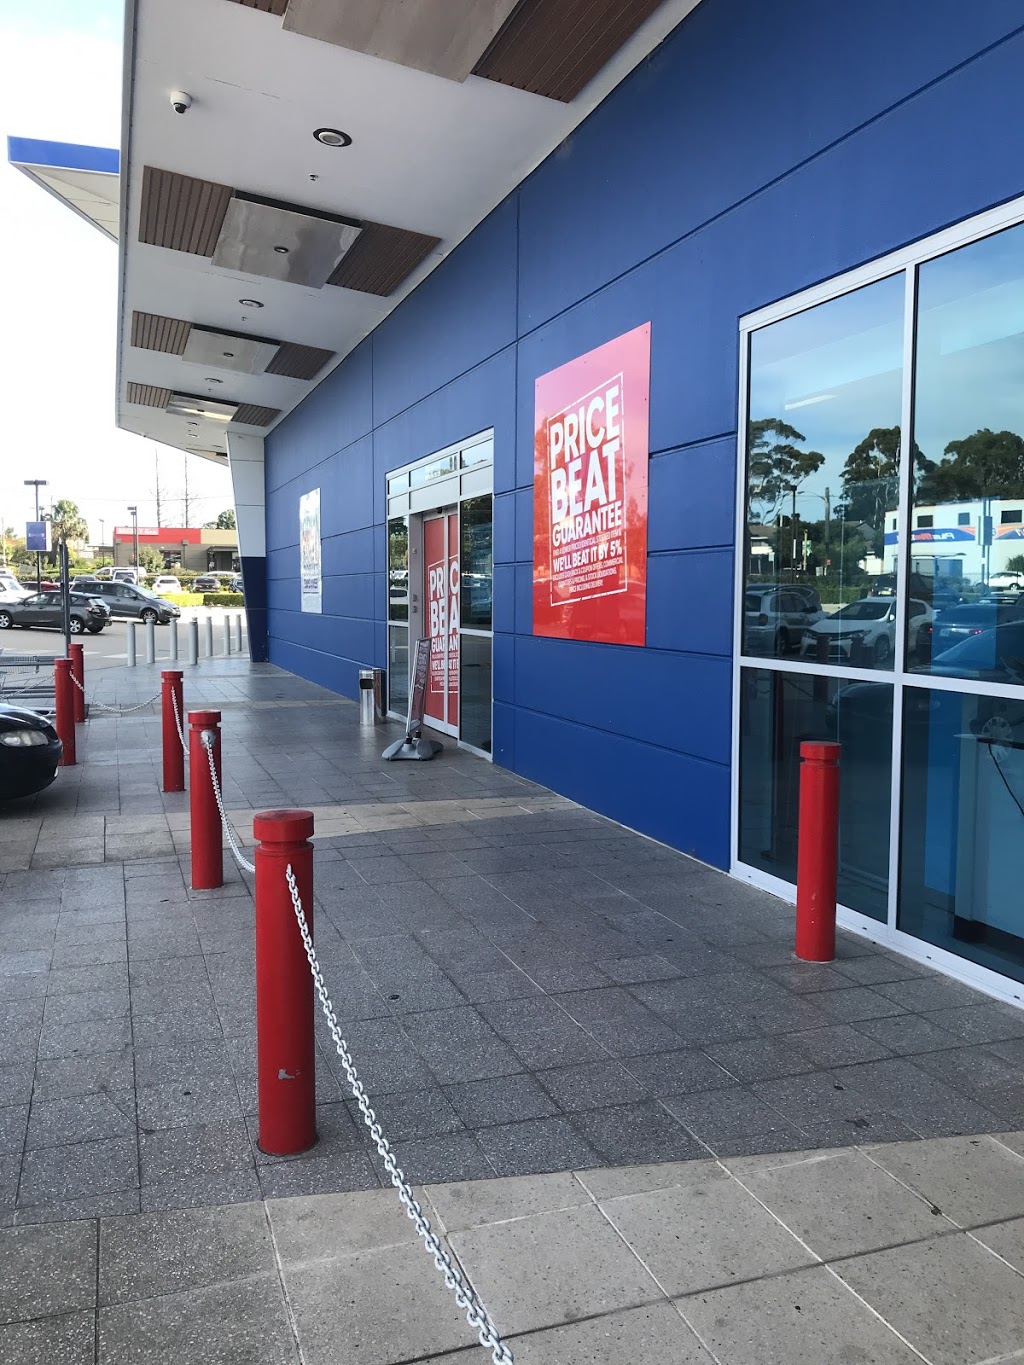 Officeworks Old Guildford | 702 Woodville Rd, Old Guildford NSW 2161, Australia | Phone: (02) 9724 8100